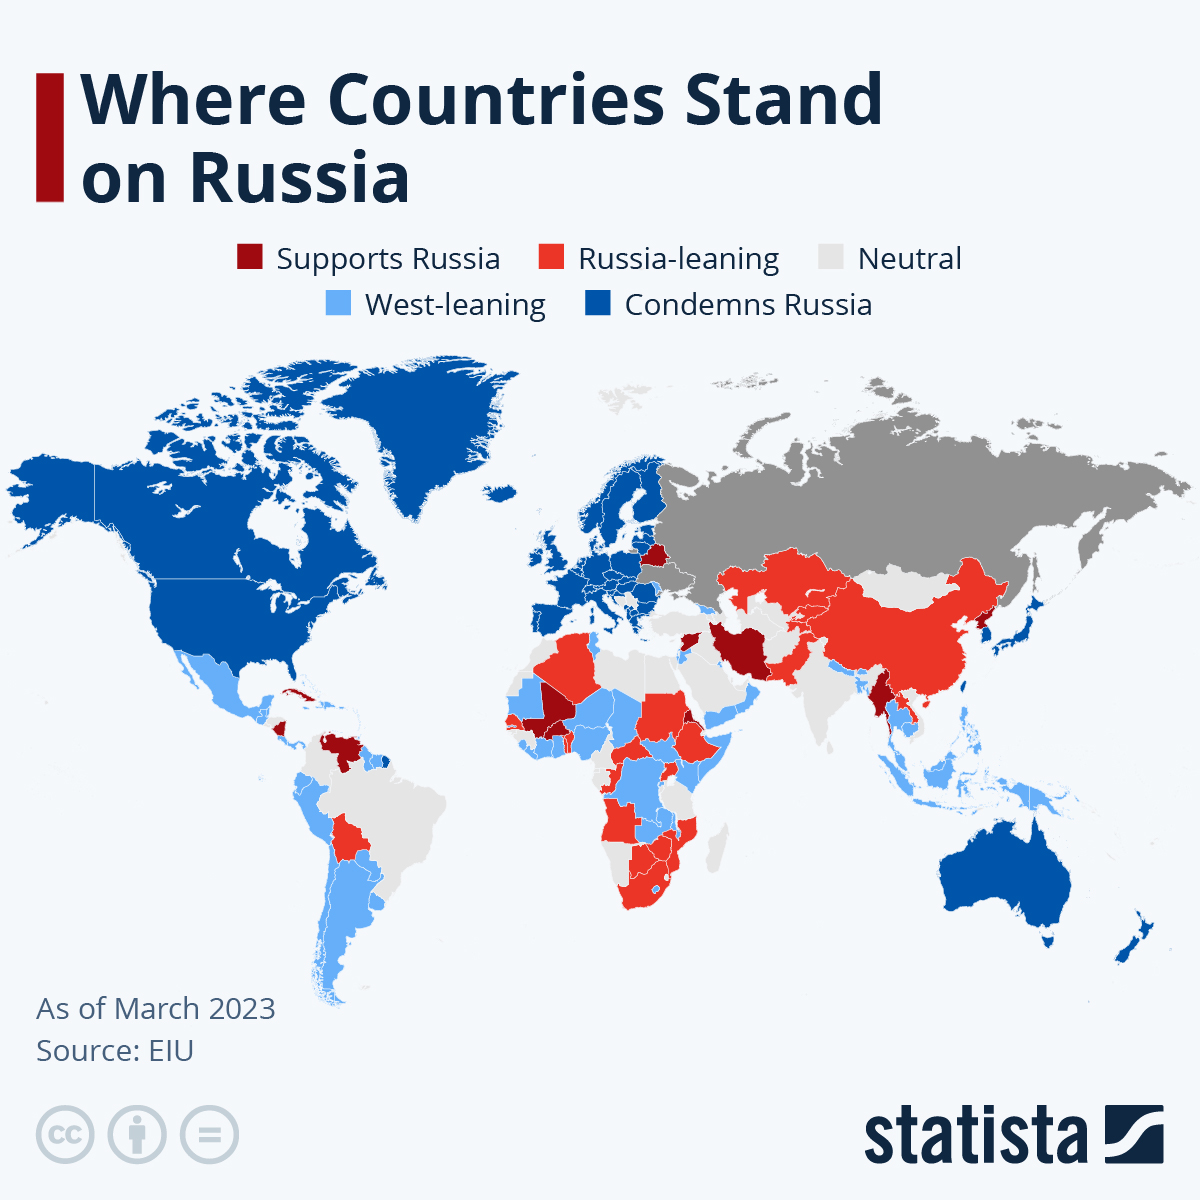 Attitude of Countries towards Russia